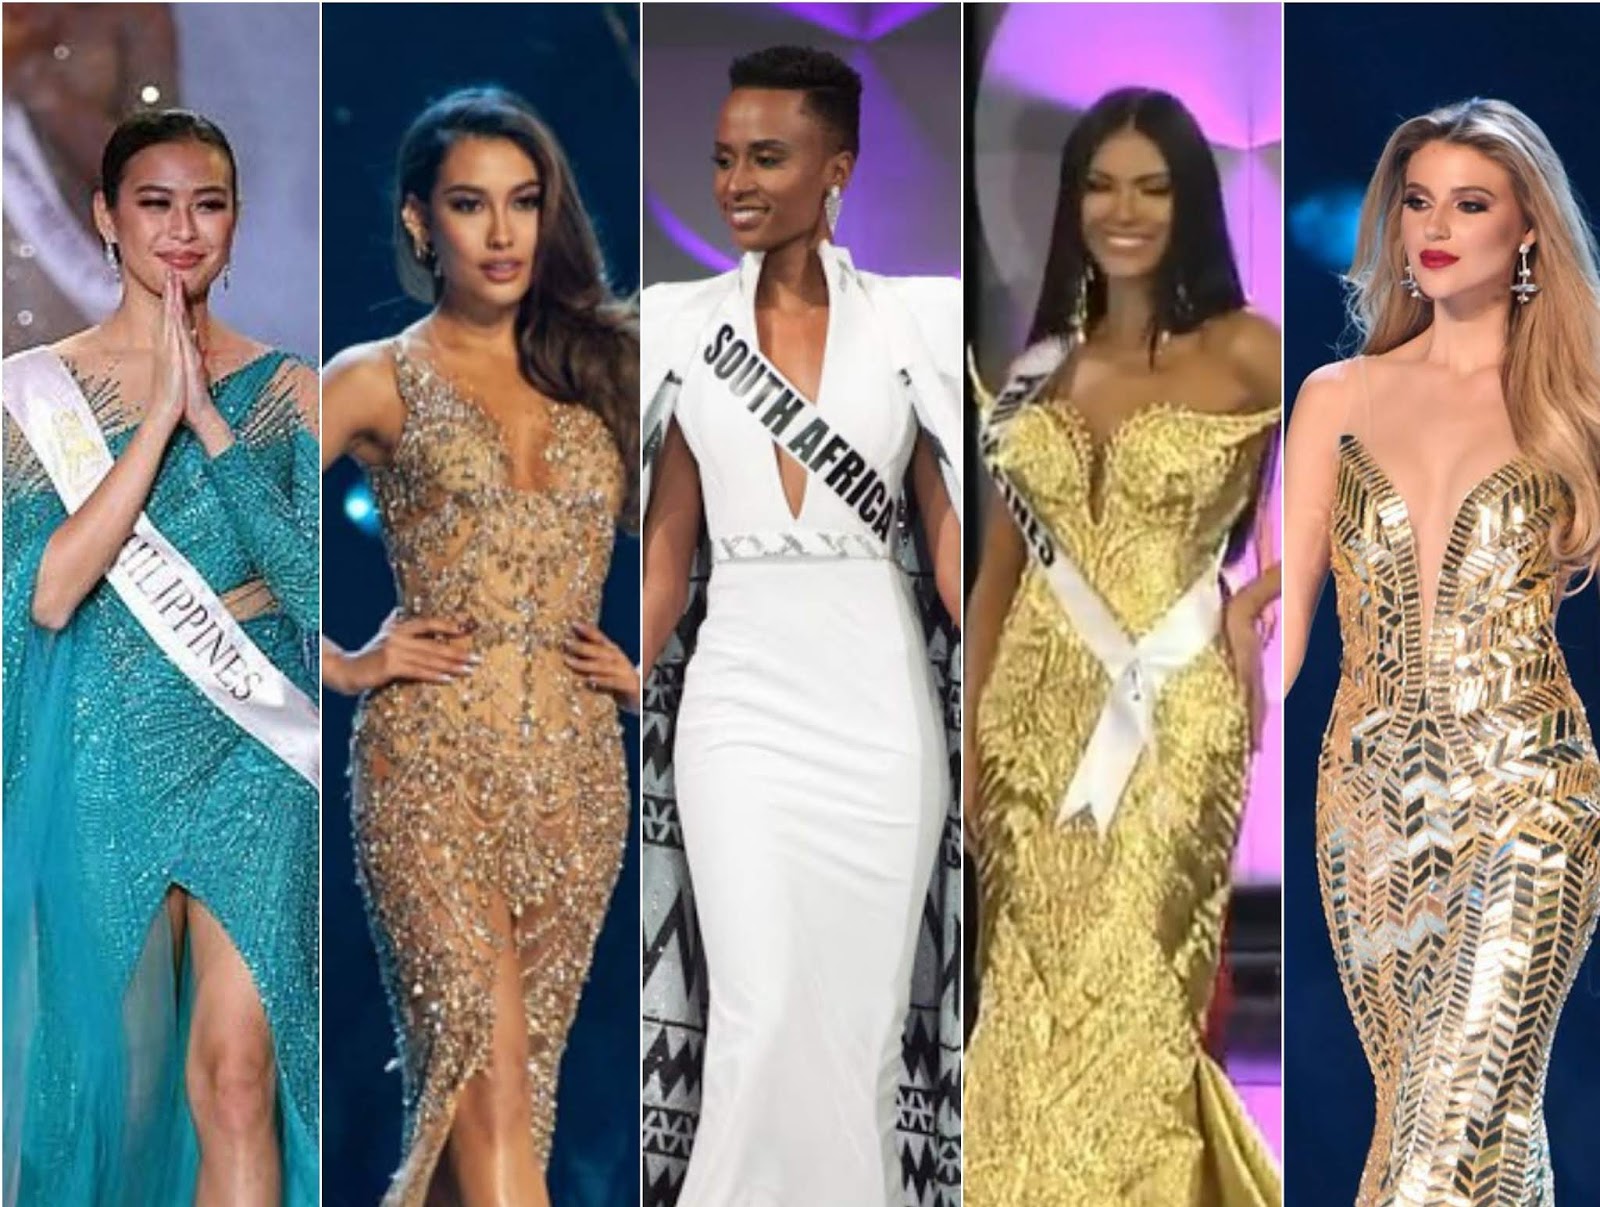 Nick Verreos: SASHES AND TIARAS....Best Beauty Pageant Gowns of 2015!